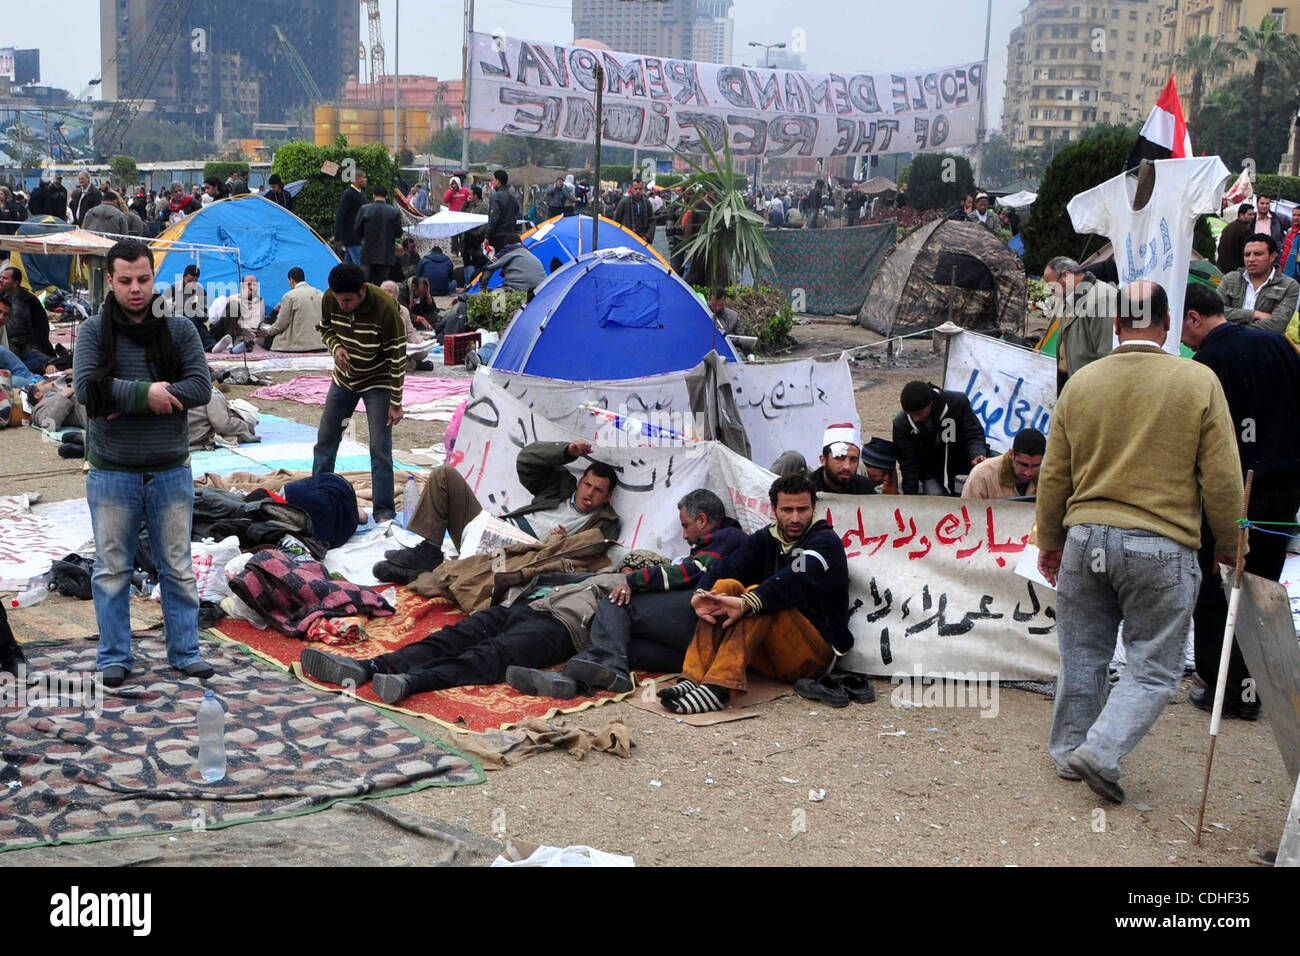 Anti-government protestors camp in Tahrir Square, Cairo, Egypt, Saturday, Feb. 5, 2011. President Barack Obama said Egypt's Hosni Mubarak should do the statesmanlike thing and make a quick handoff to a more representative government.  Photo by Ahmed Asad Stock Photo